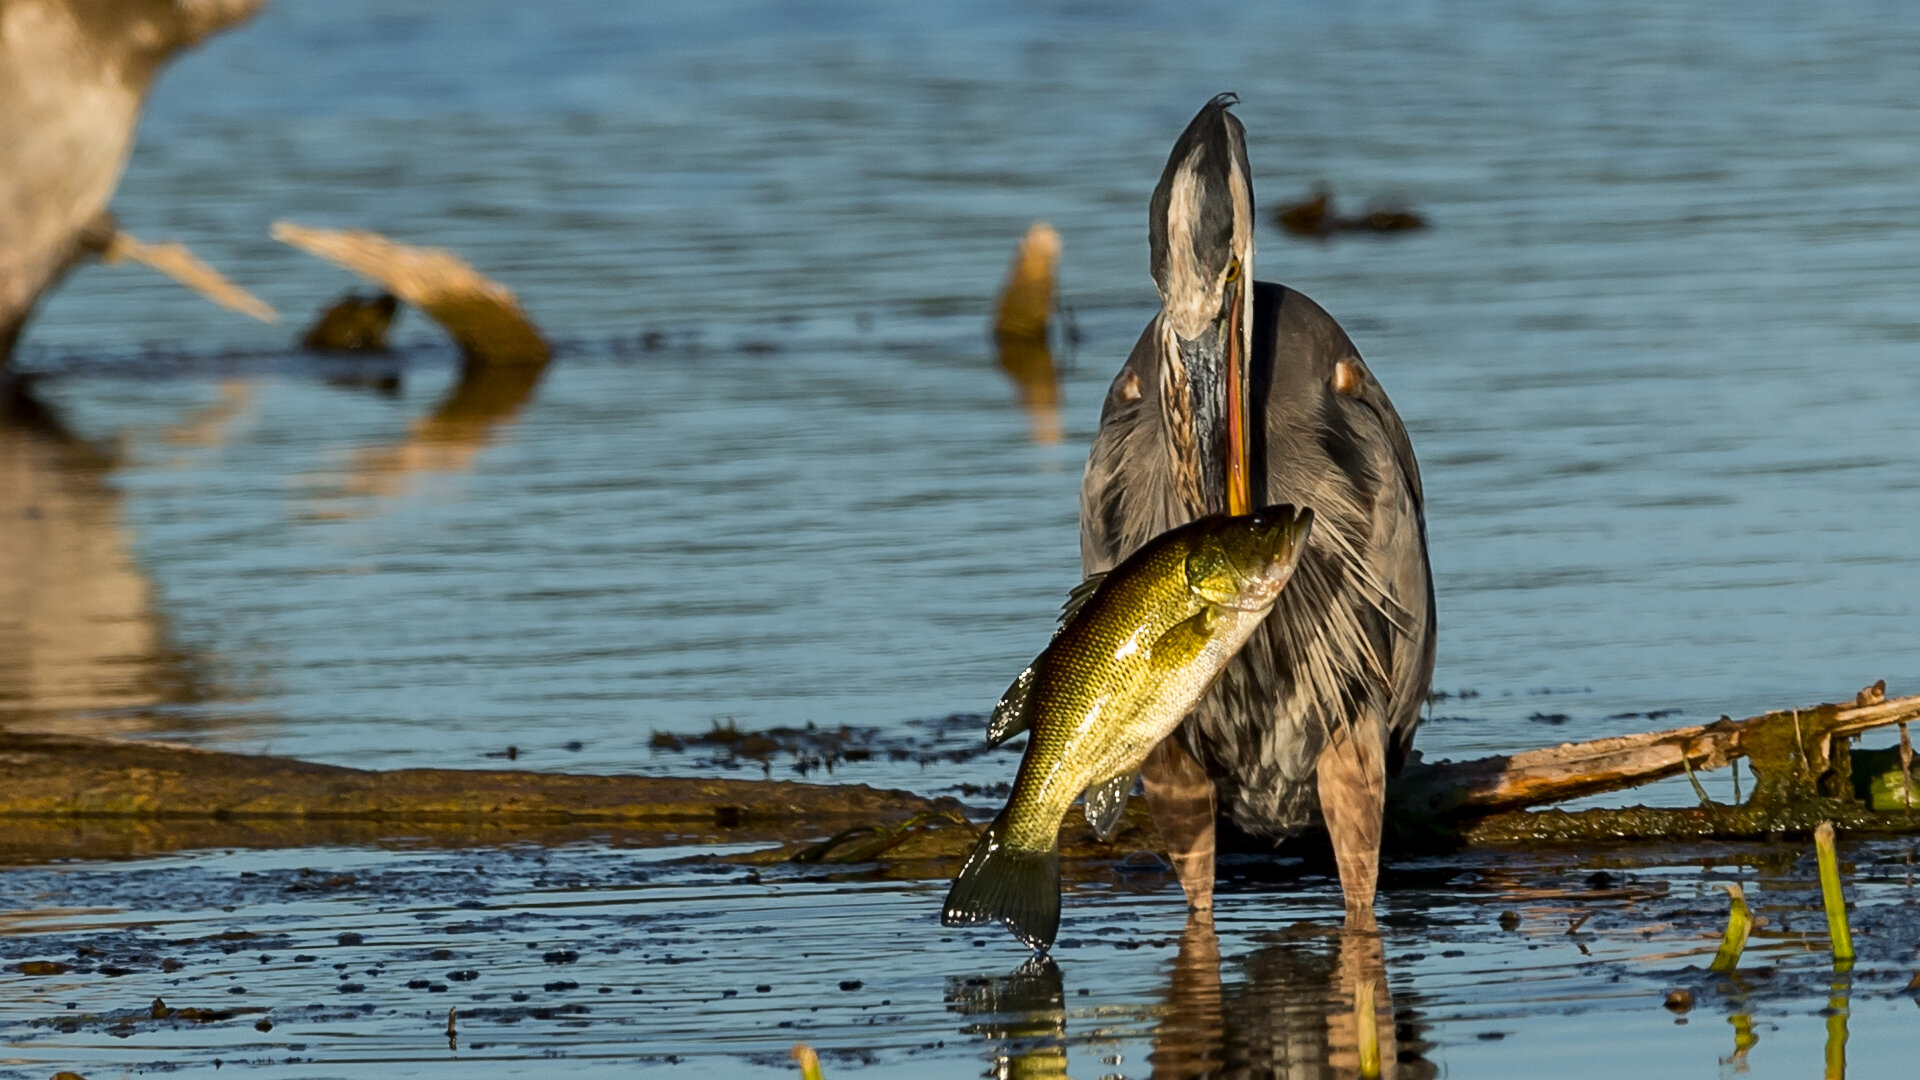 016 Look at the size of the large mouth bass that the heron has caught__It is about 4 lbs..jpg